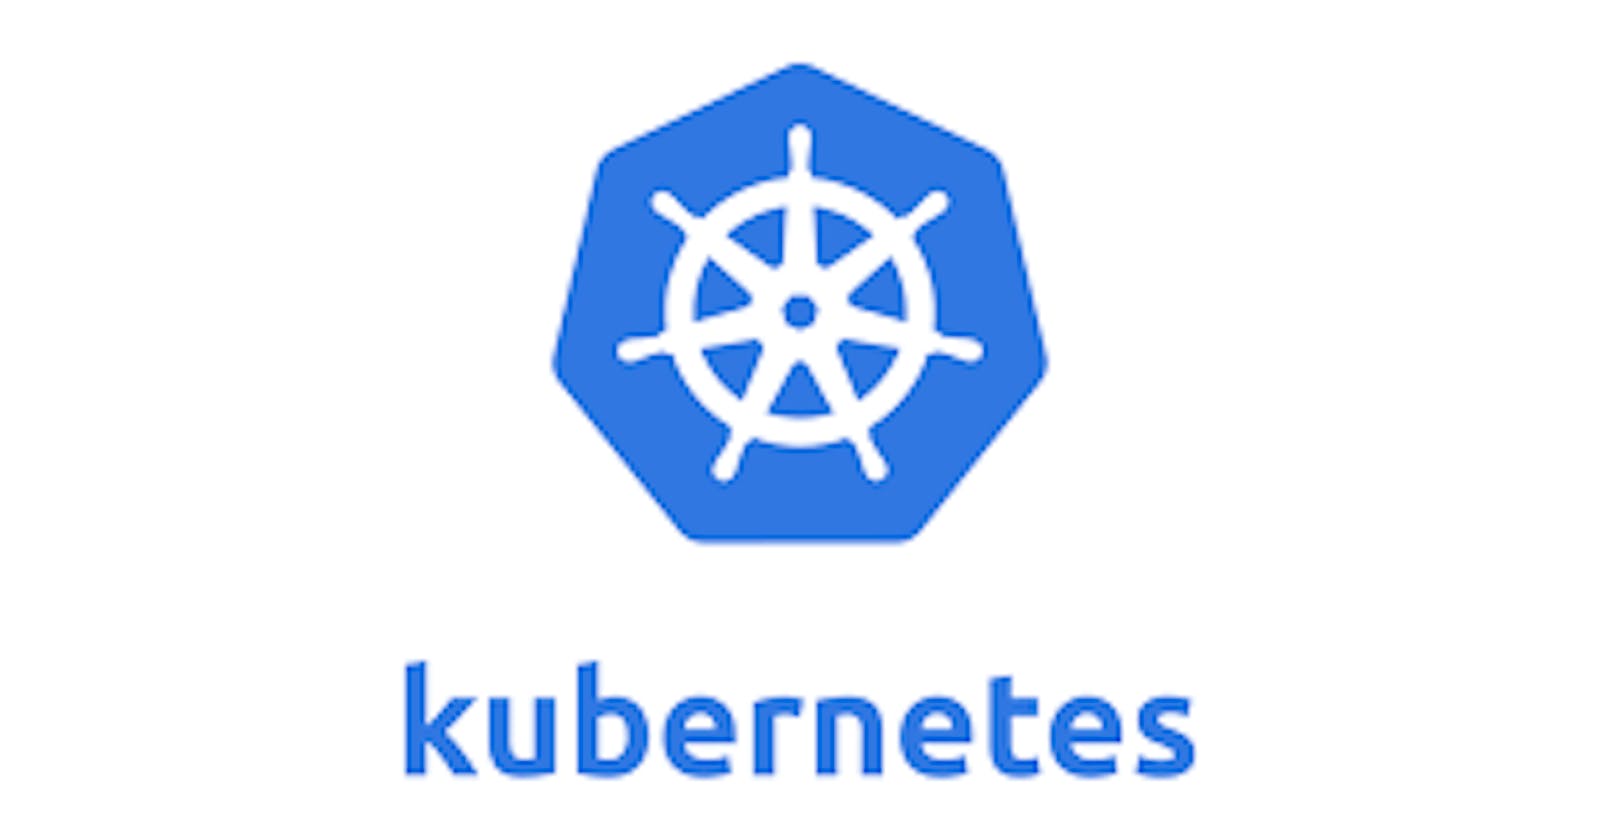 A complete guide on Kubernetes